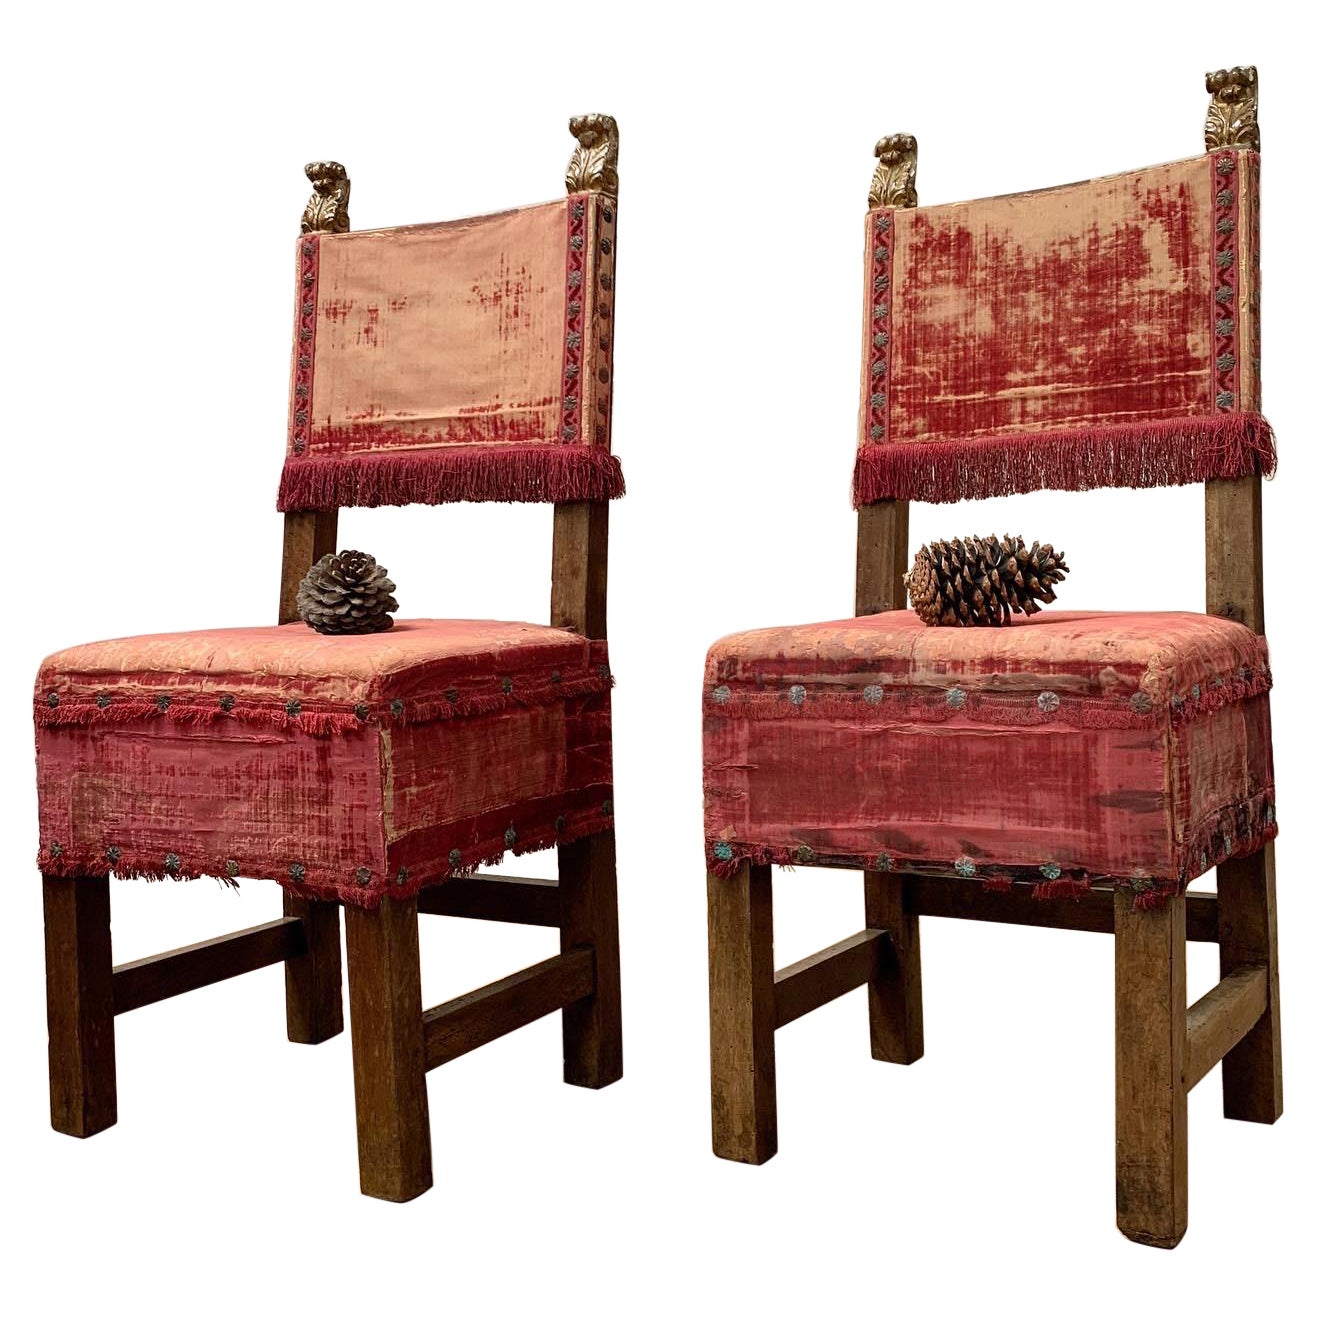 Pair of Seventeenth Century Italian Chairs For Sale